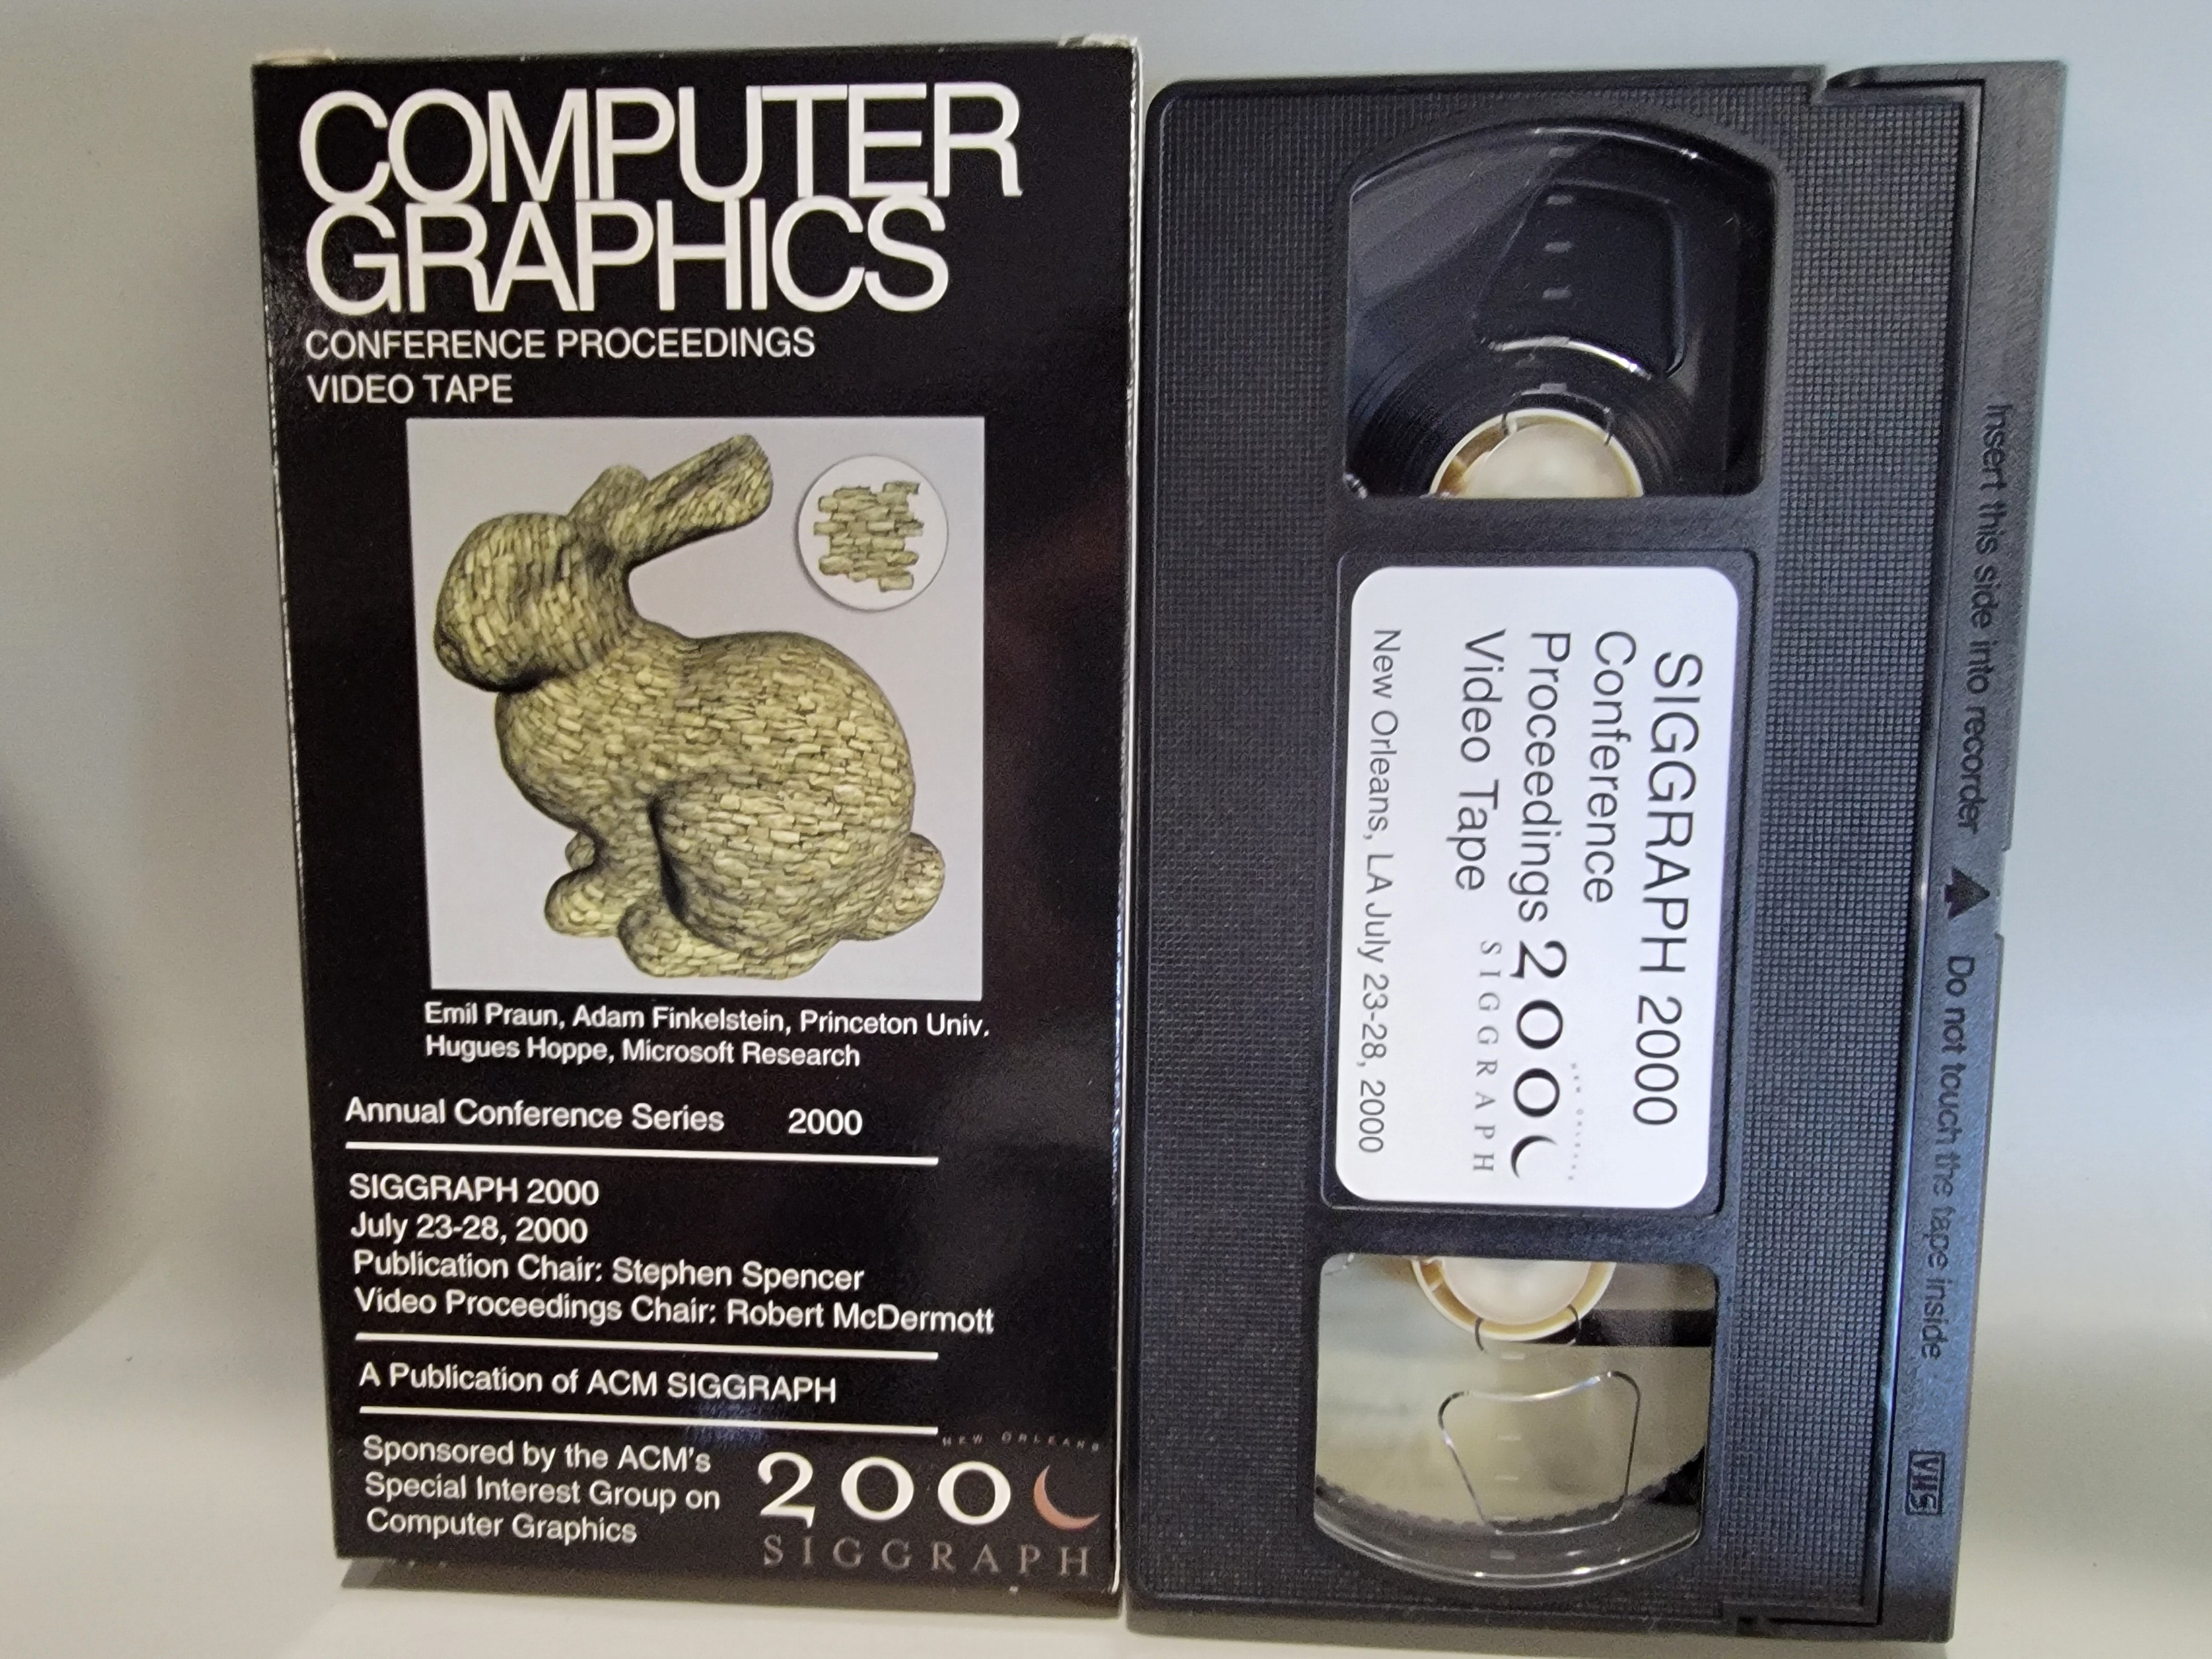 COMPUTER GRAPHICS: CONFERENCE PROCEEDINGS VIDEO TAPE VHS [USED]